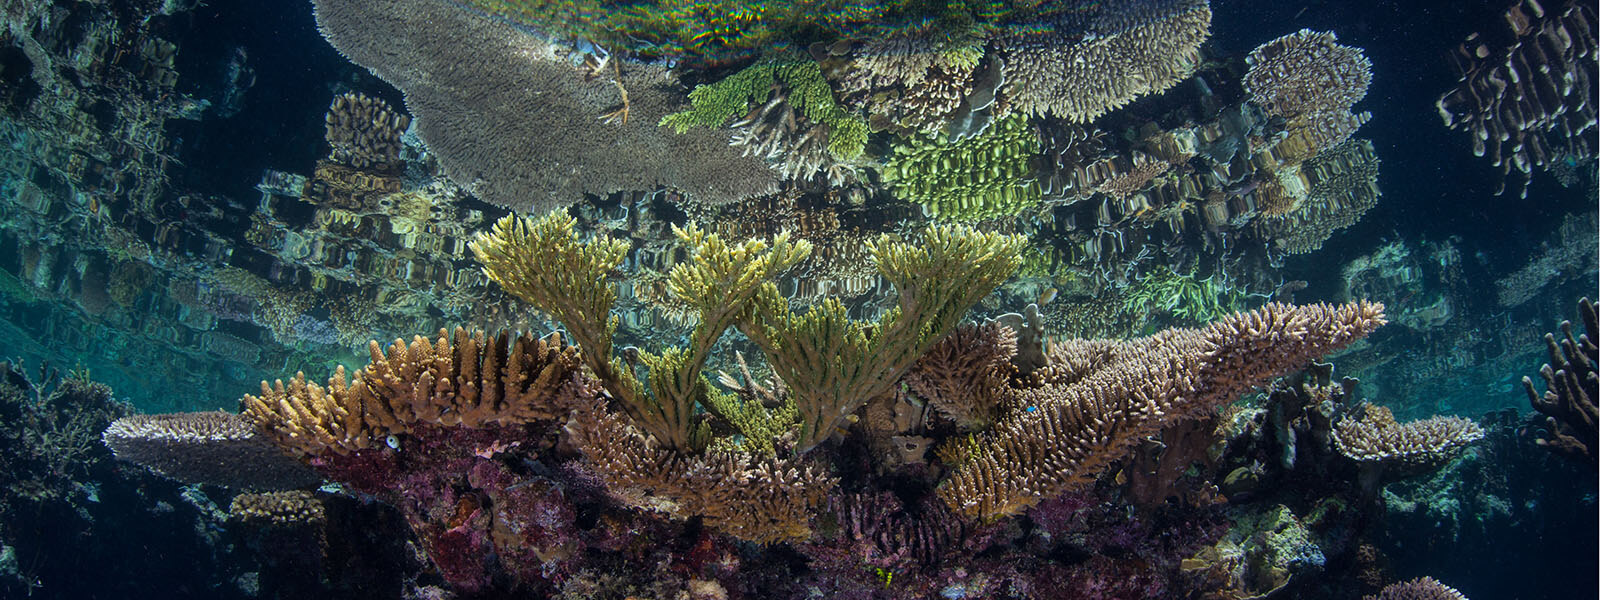 Corals in shallow water are perfect for our snorkeling activities